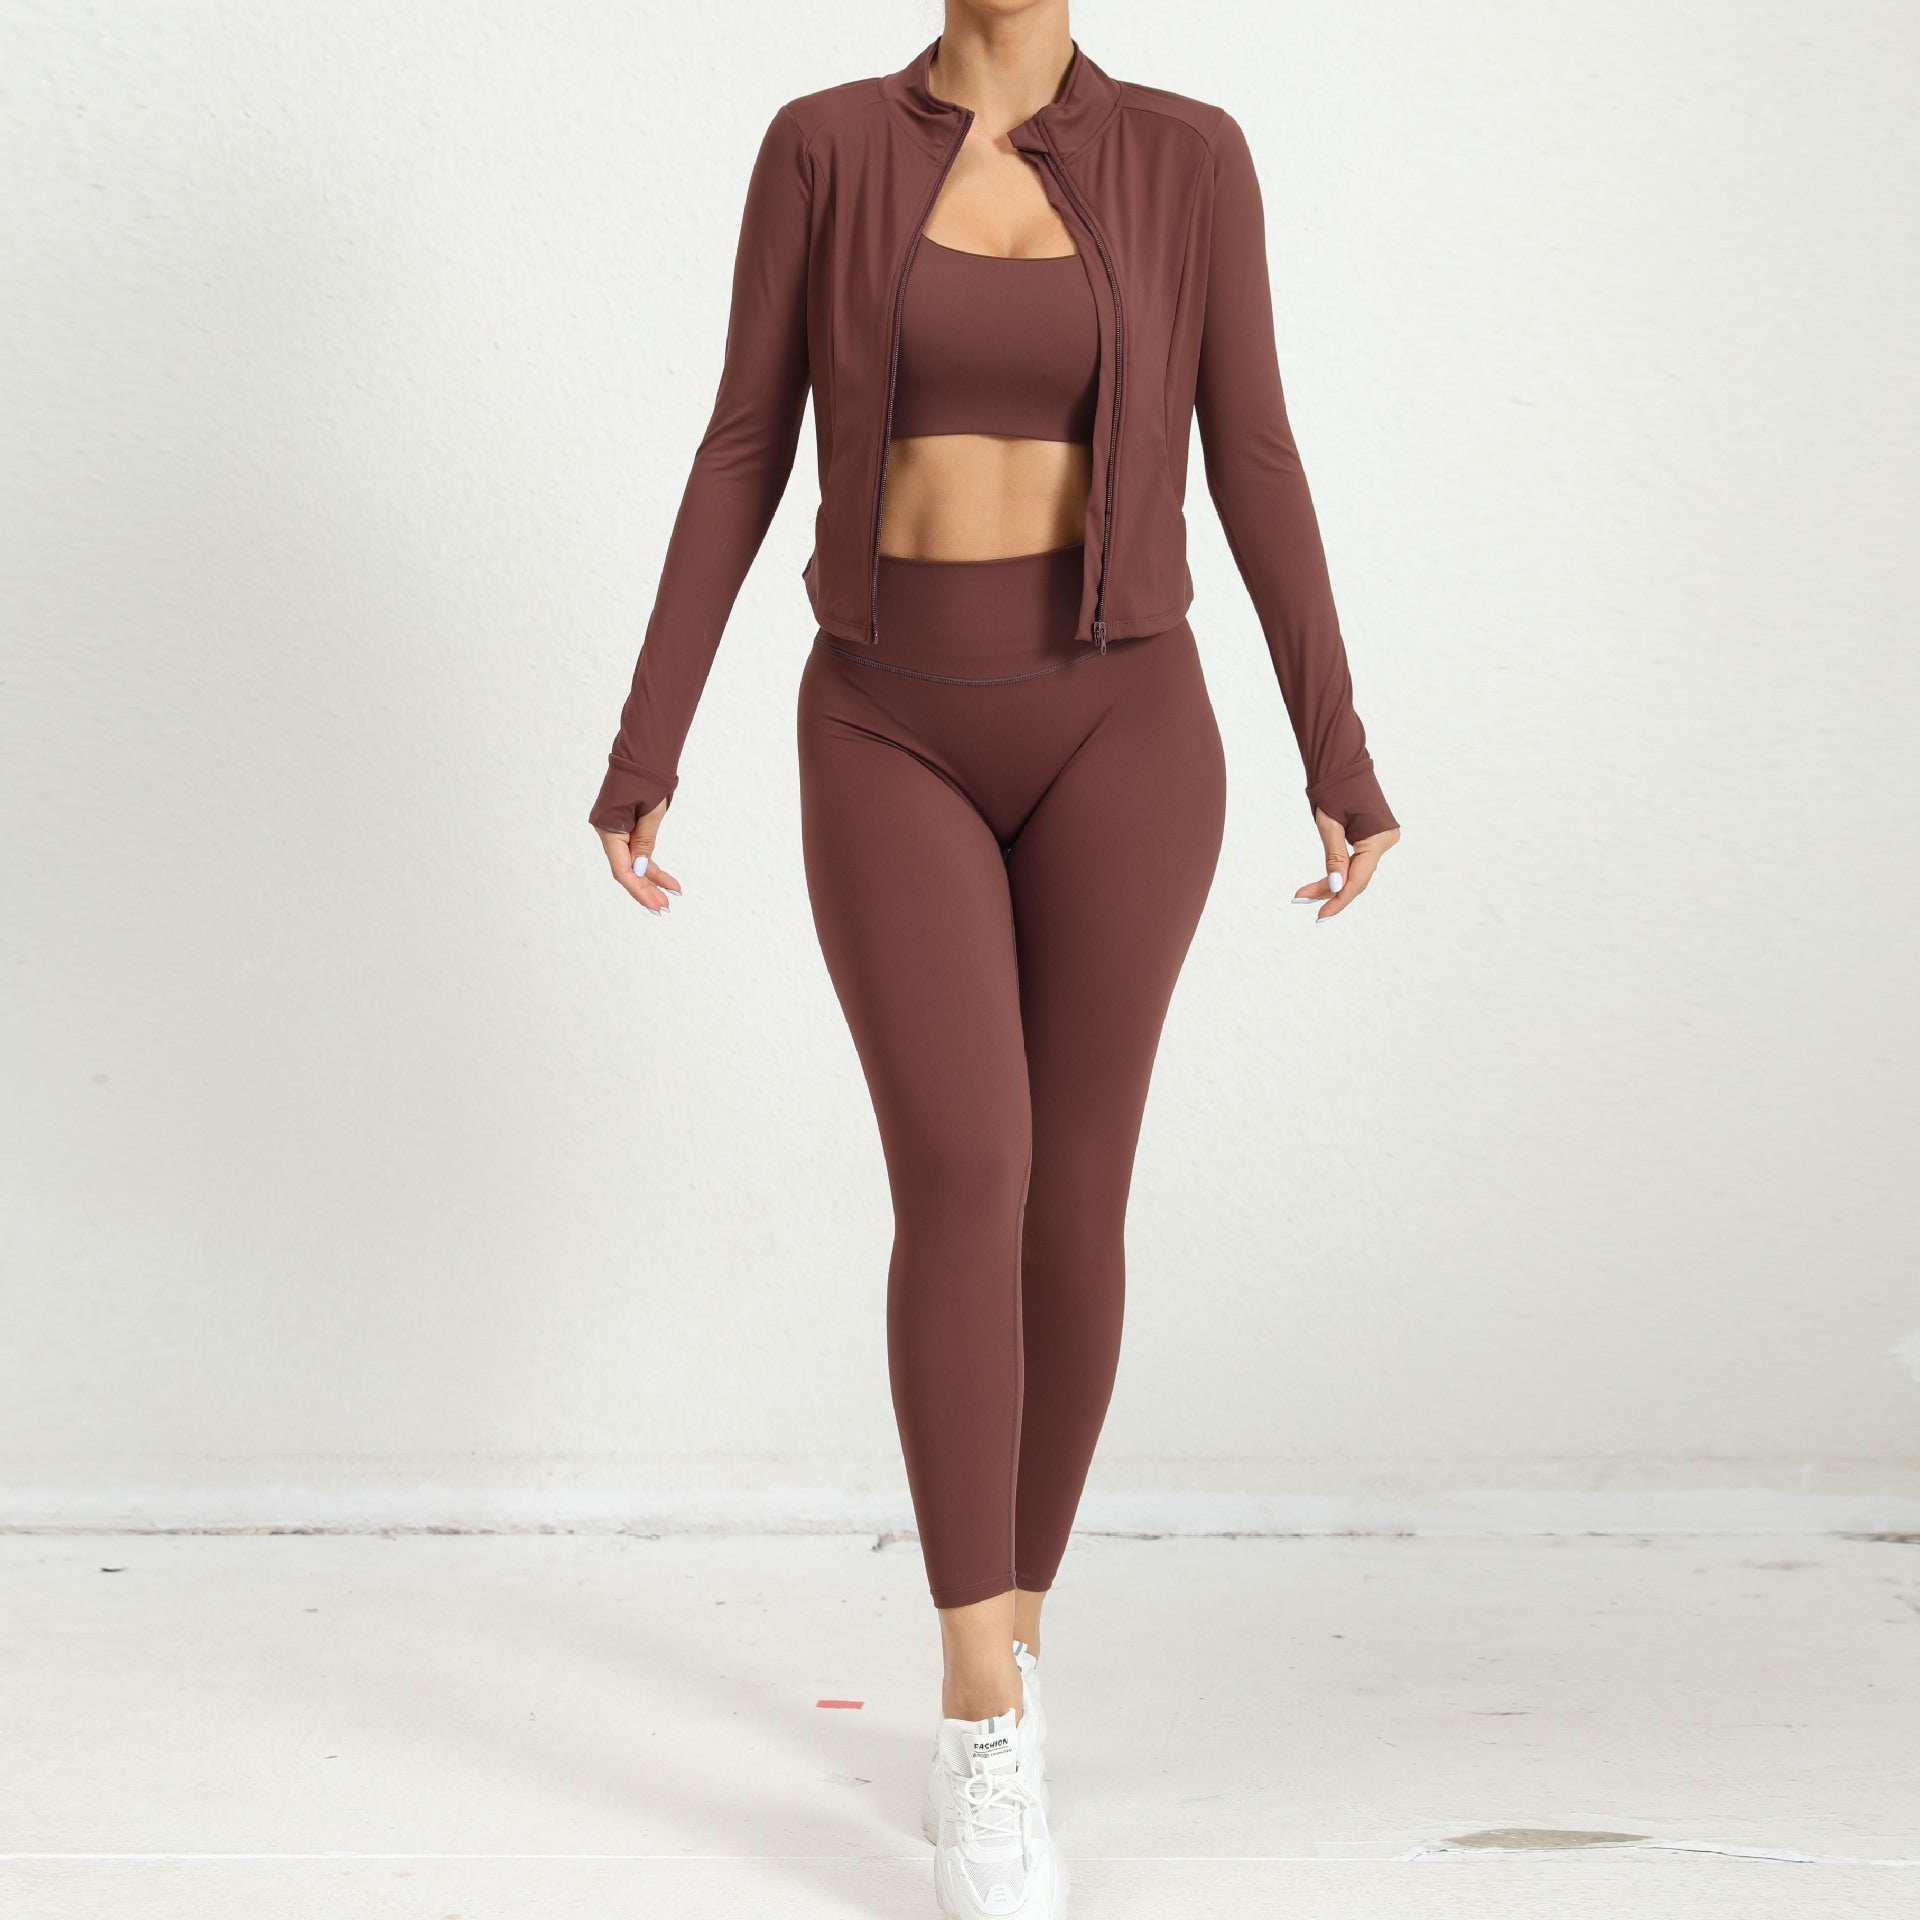 Winter Outdoors Sports Skinny Yoga Clothes Suit Nude Feel Fitness Clothes Shockproof High Waist Yoga Clothes Three Piece Suit